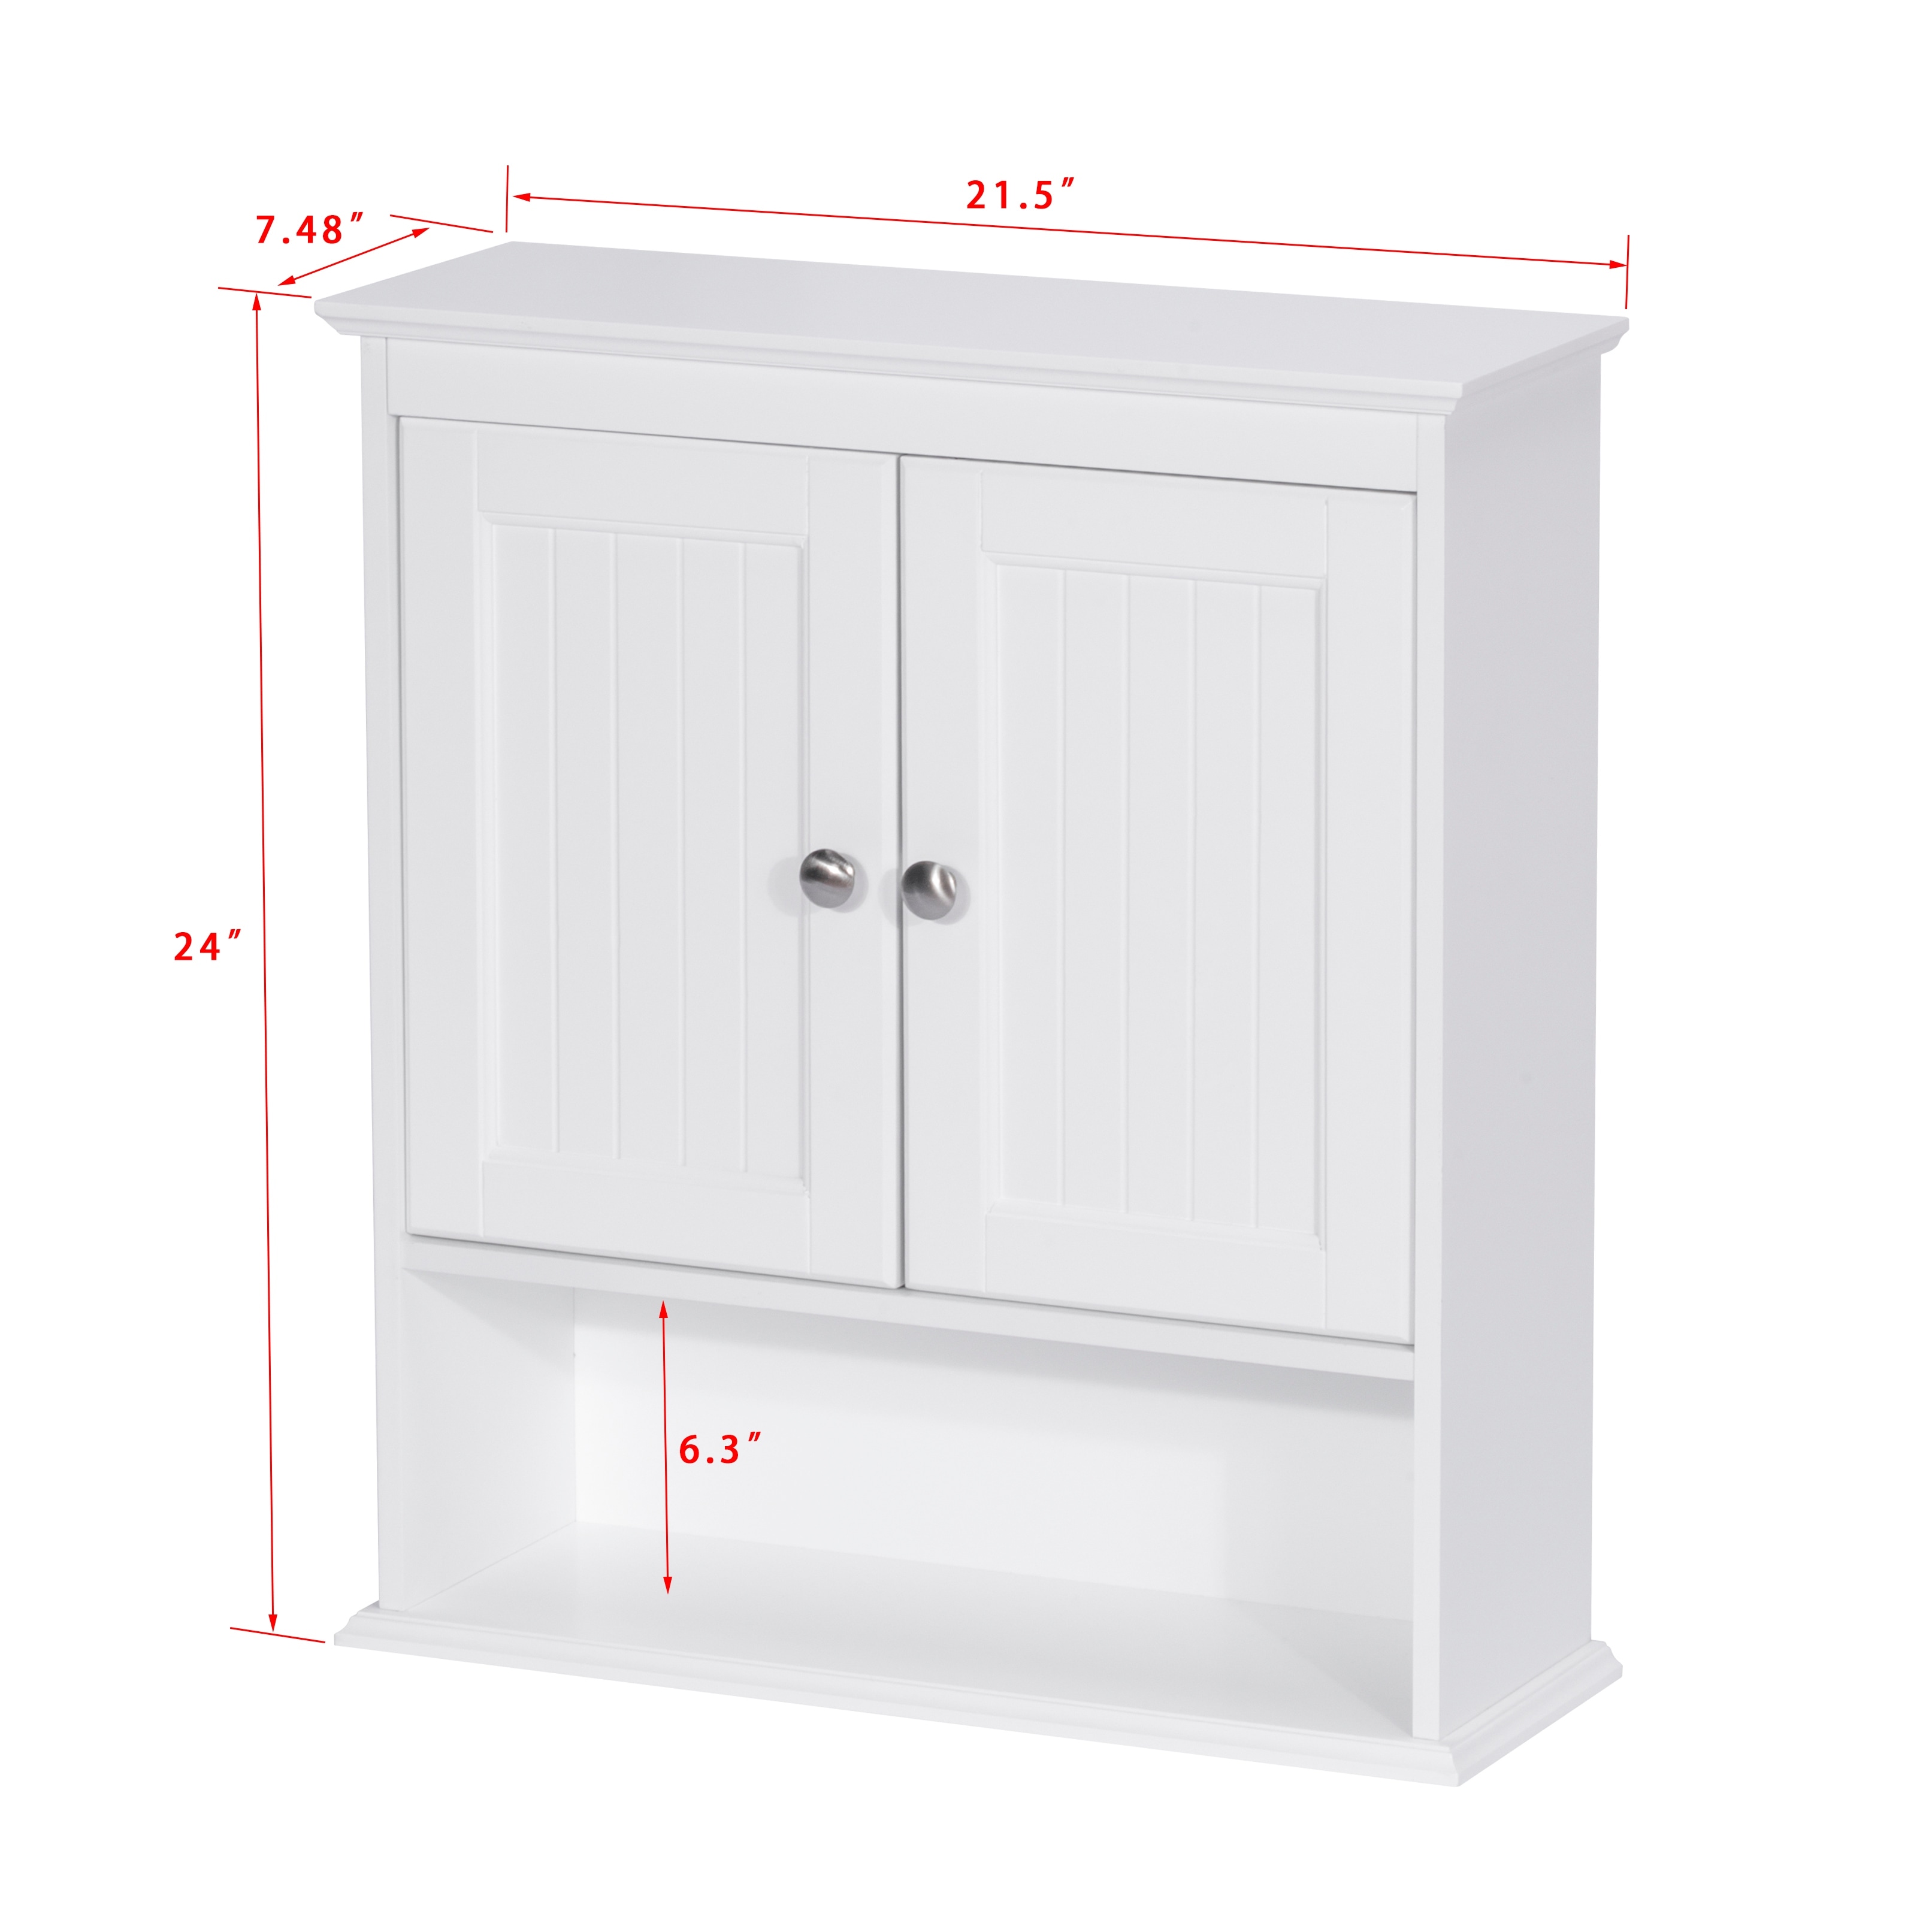 Spirich Home Bathroom Shelf Over The Toilet with 4 Cubbies, Bathroom  Cabinet Organizer Over Toilet, Space Saver Cabinet Storage - On Sale - Bed  Bath & Beyond - 31672997